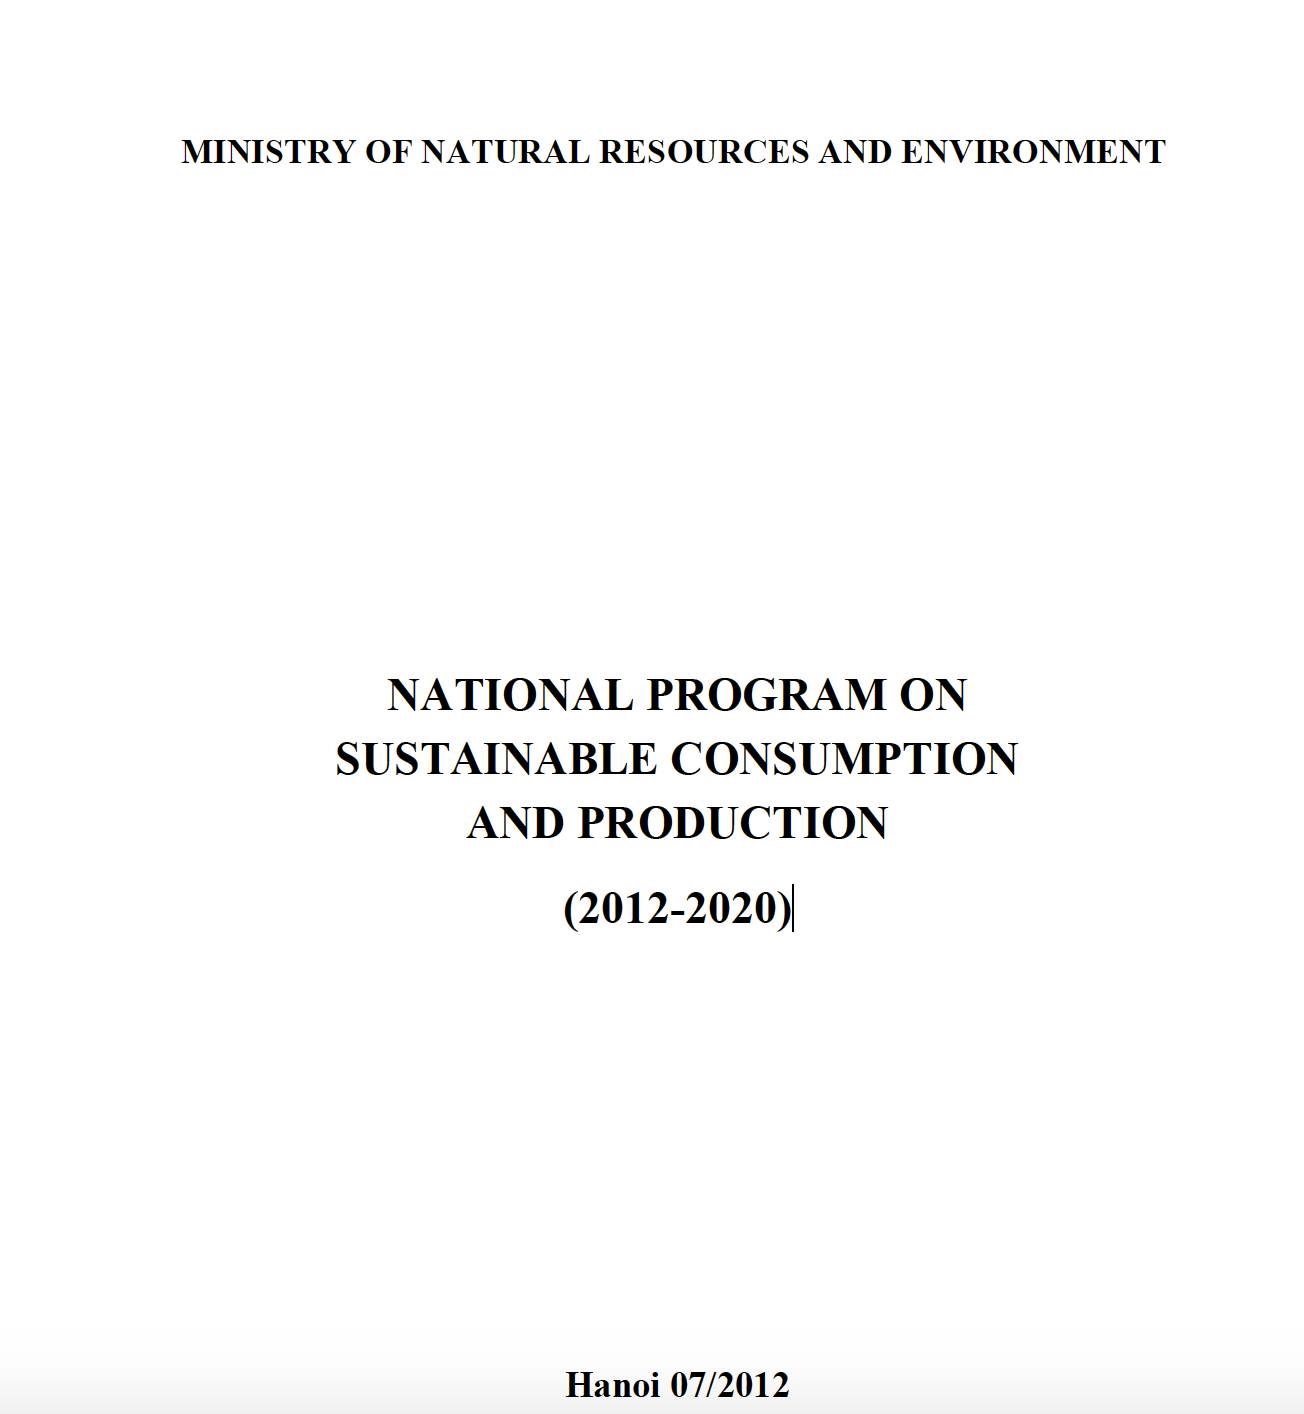 Vietnam National Program on Sustainable Consumption and Production (2012-2020)